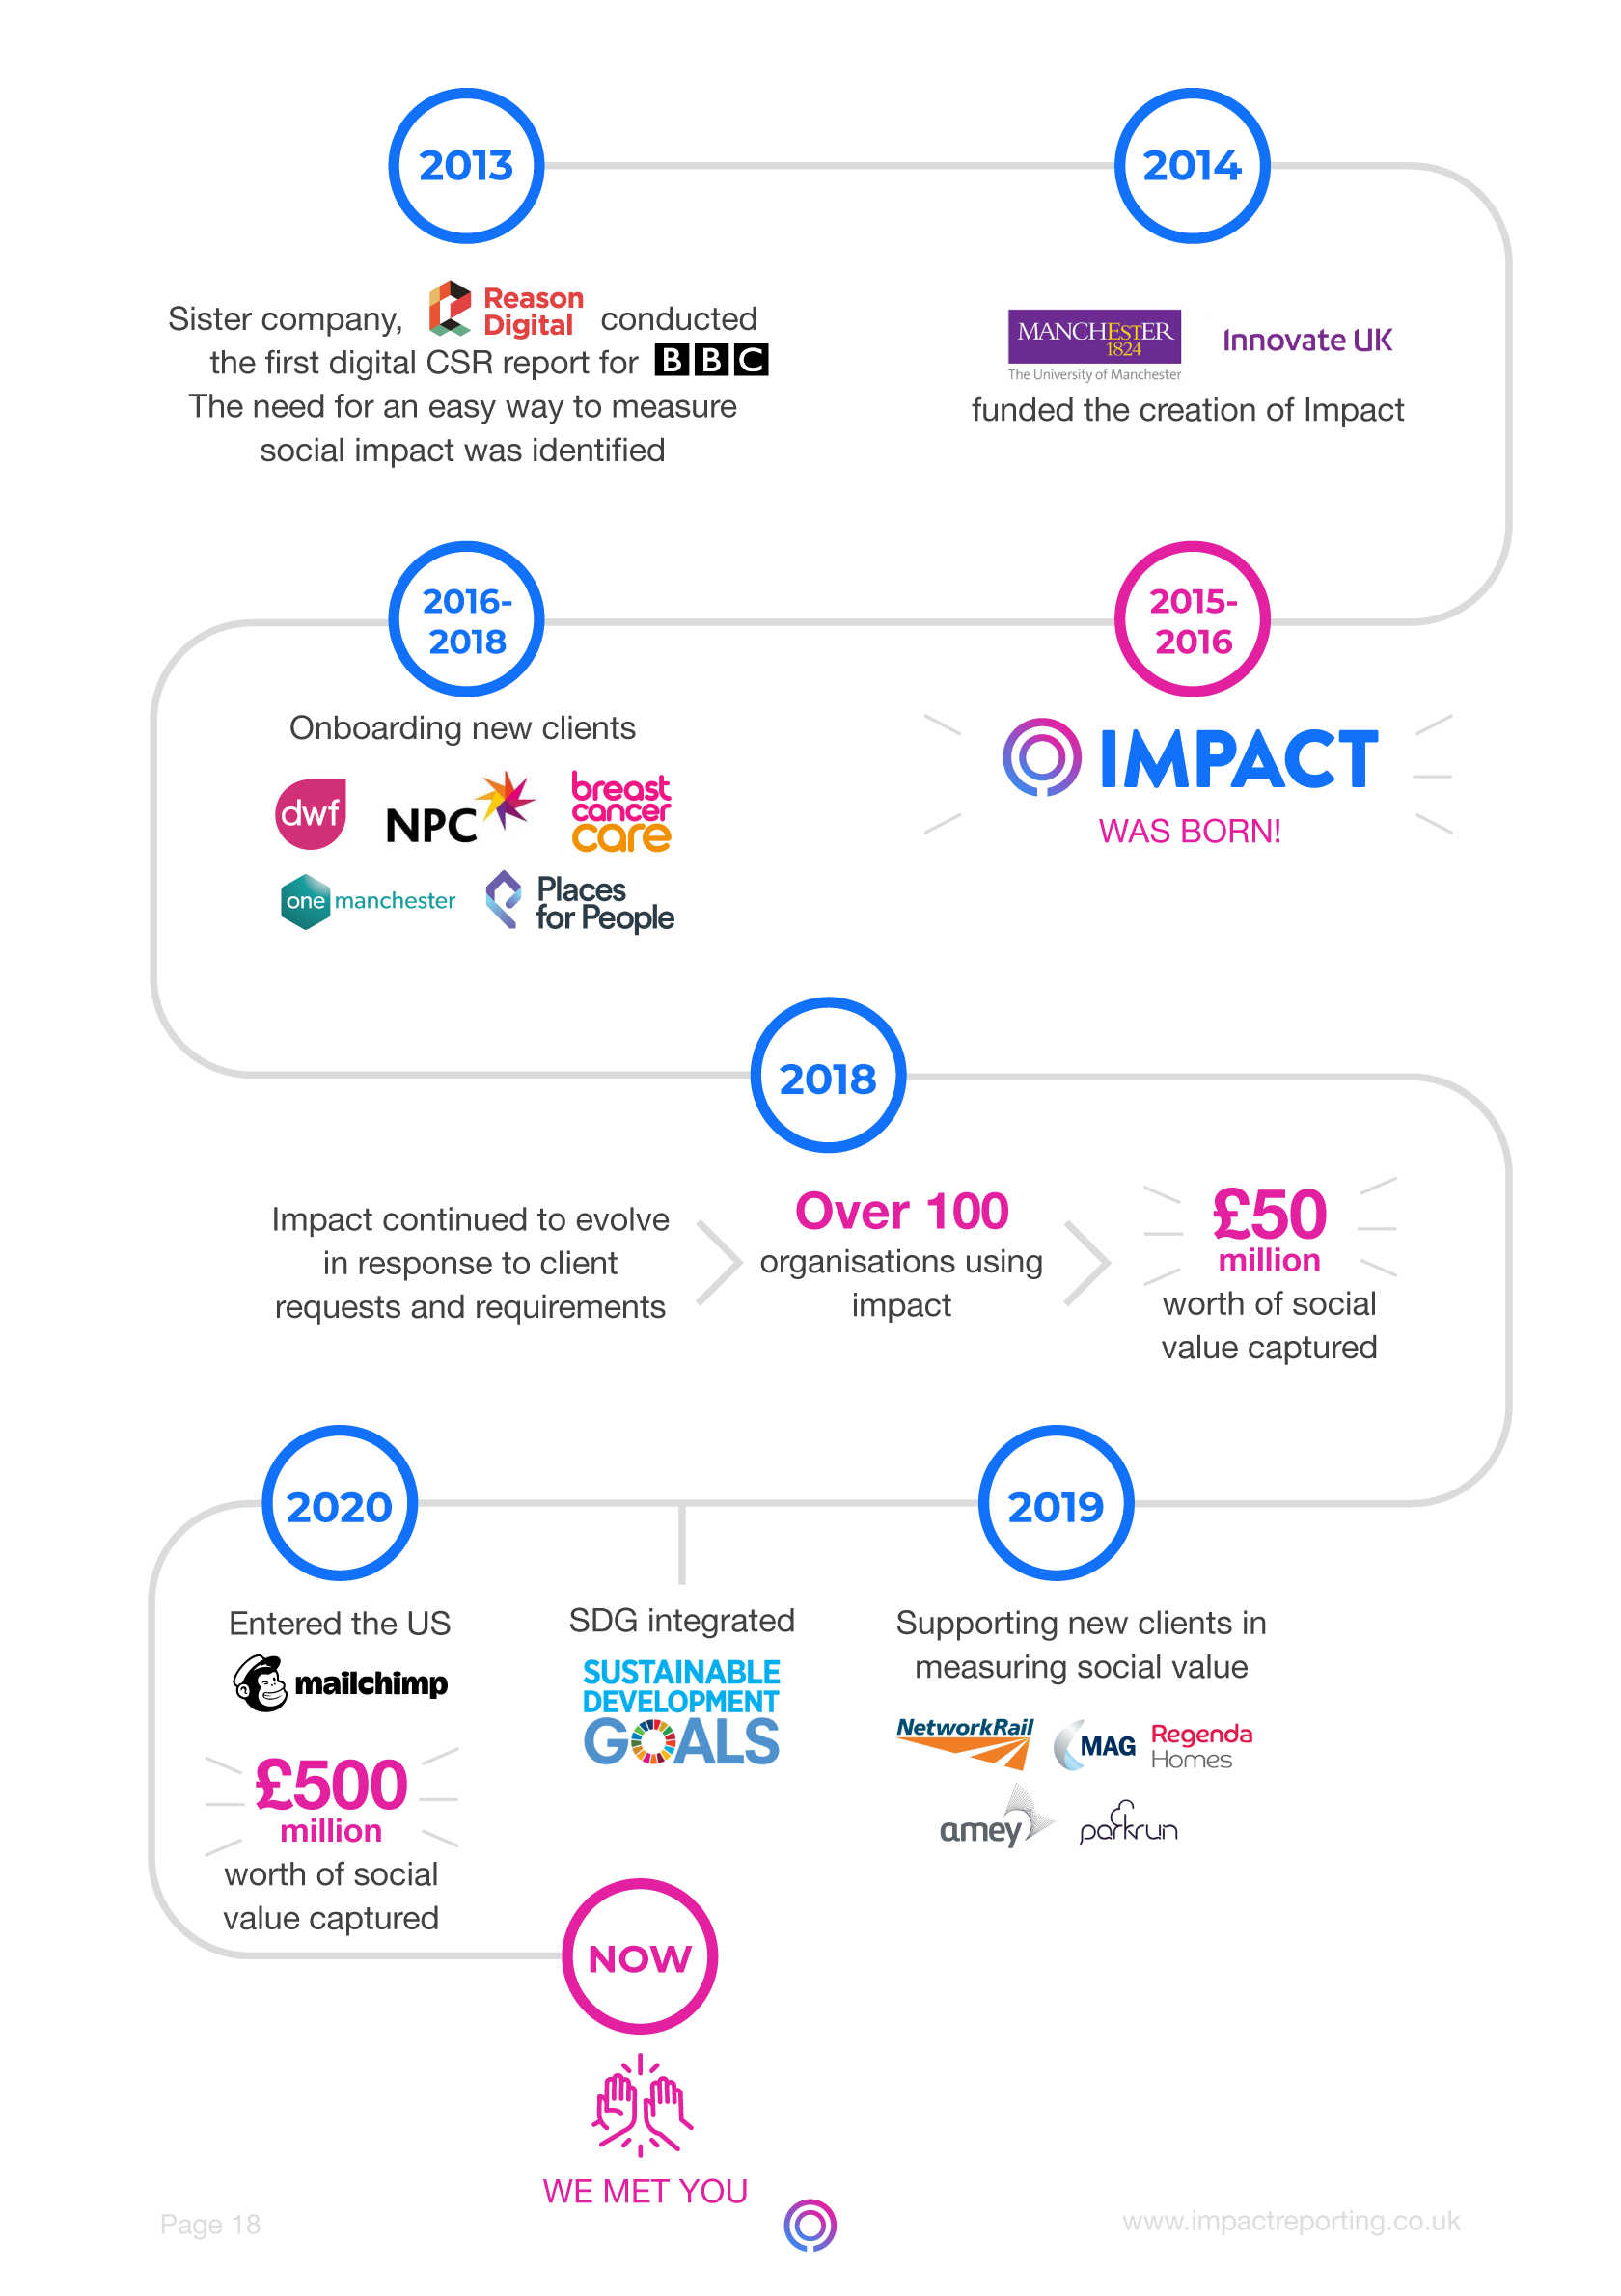 A timeline showing Impact's progress from 2013 to 2021